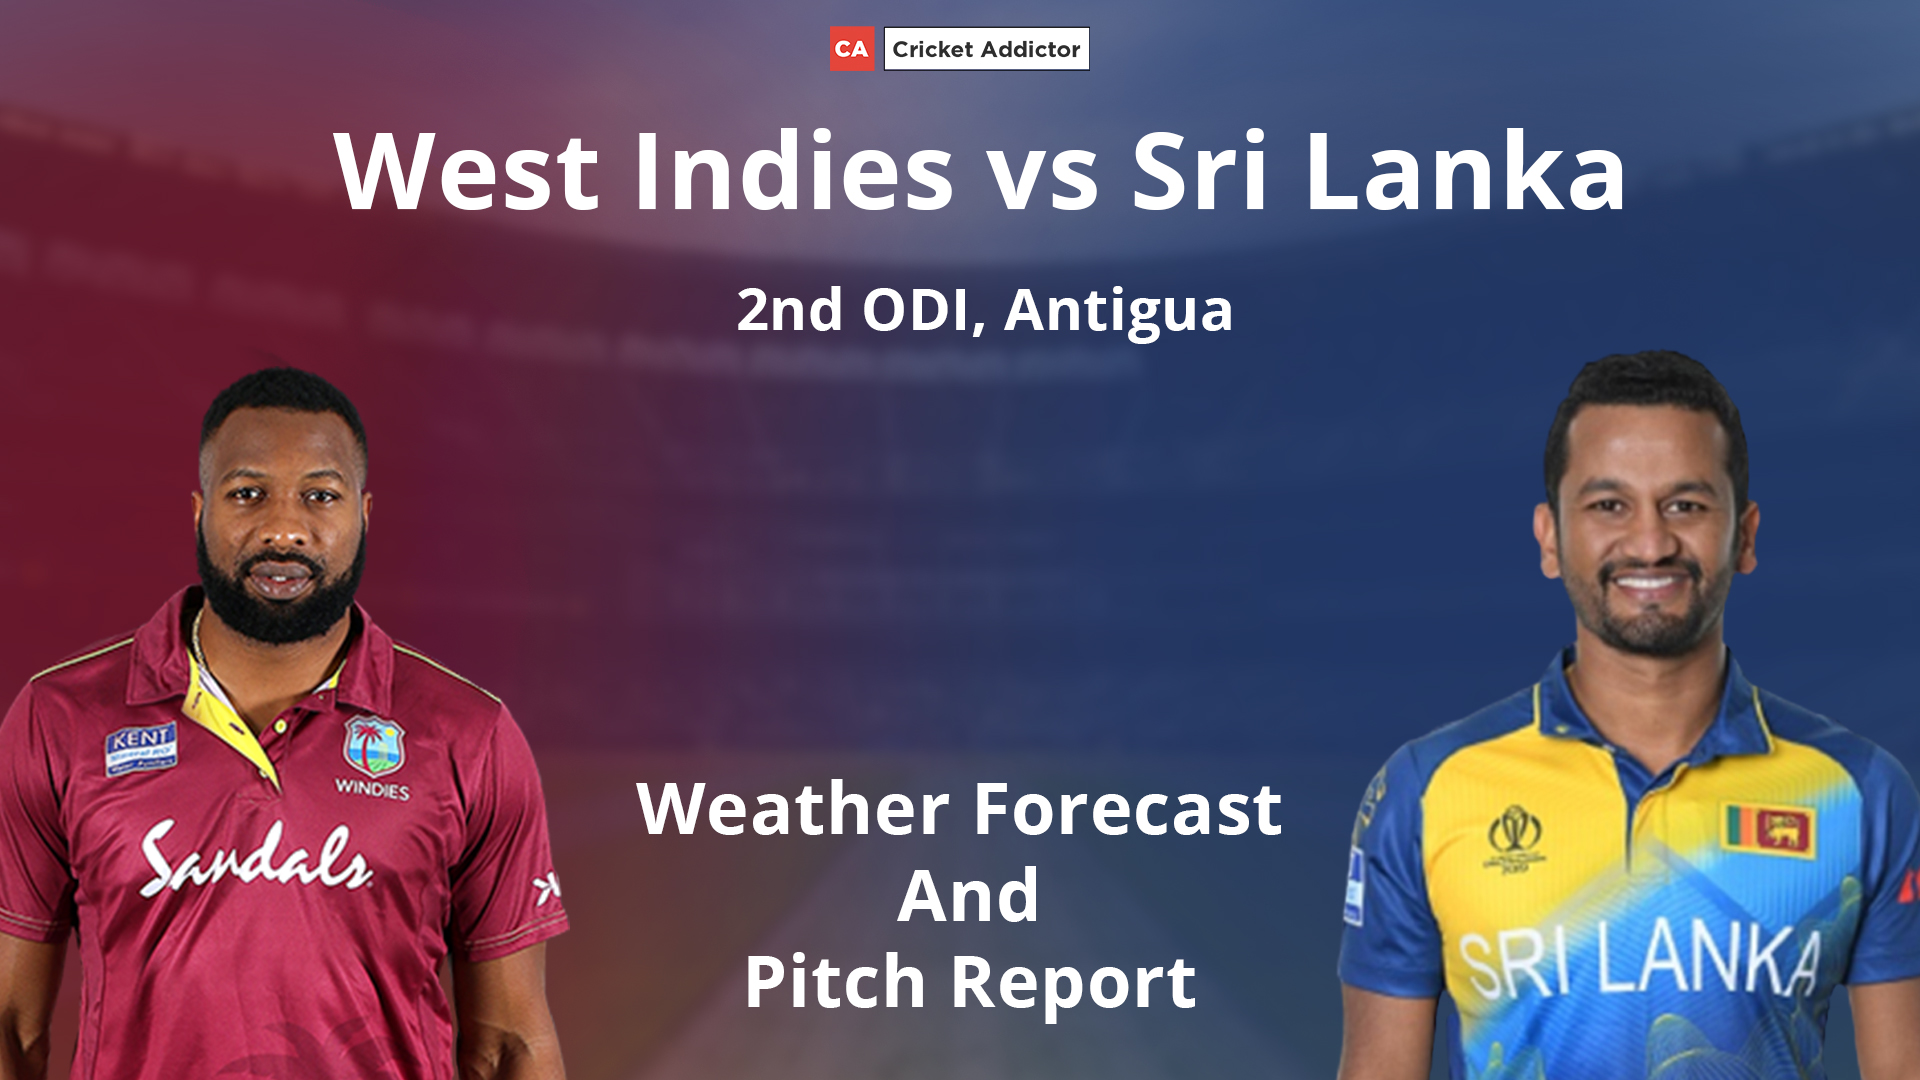 West Indies vs Sri Lanka 2021, 2nd ODI: Weather Forecast And Pitch Report